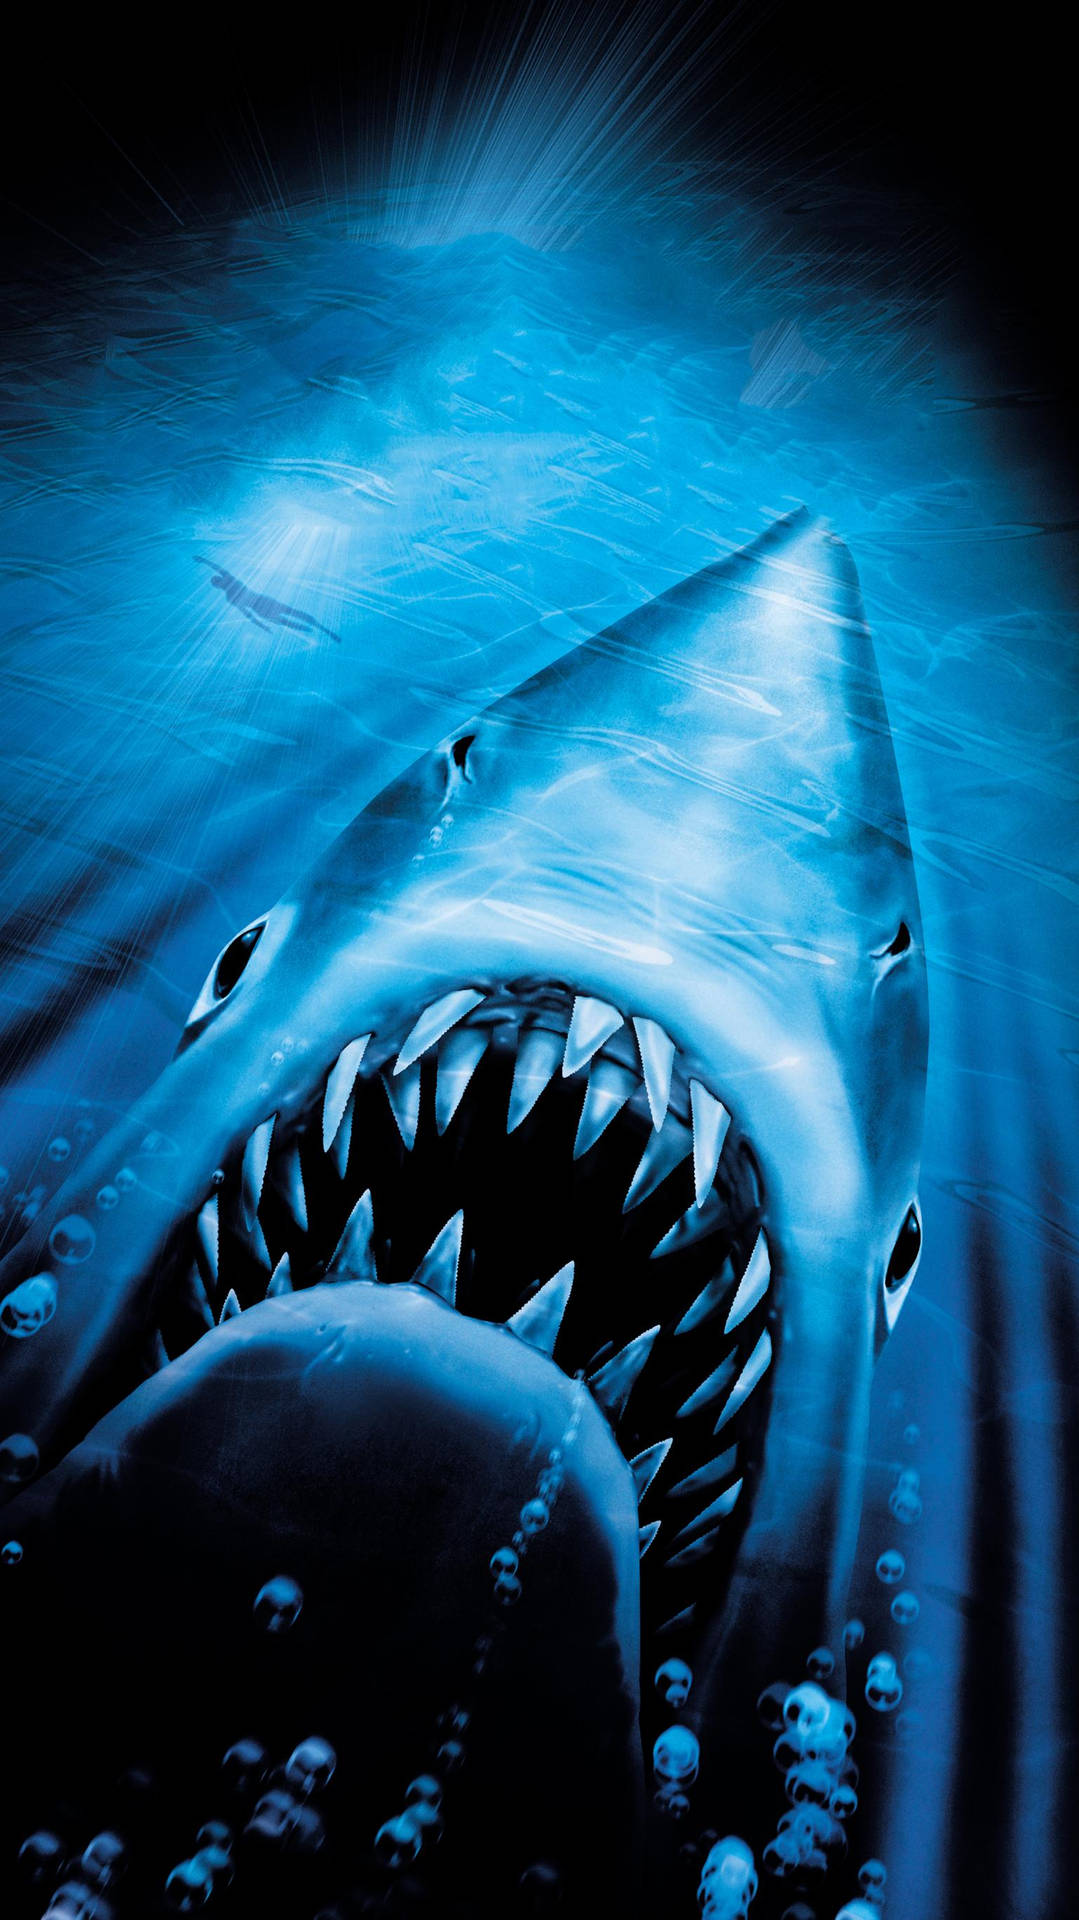 The Classic Image Of Jaws, The Great White Shark